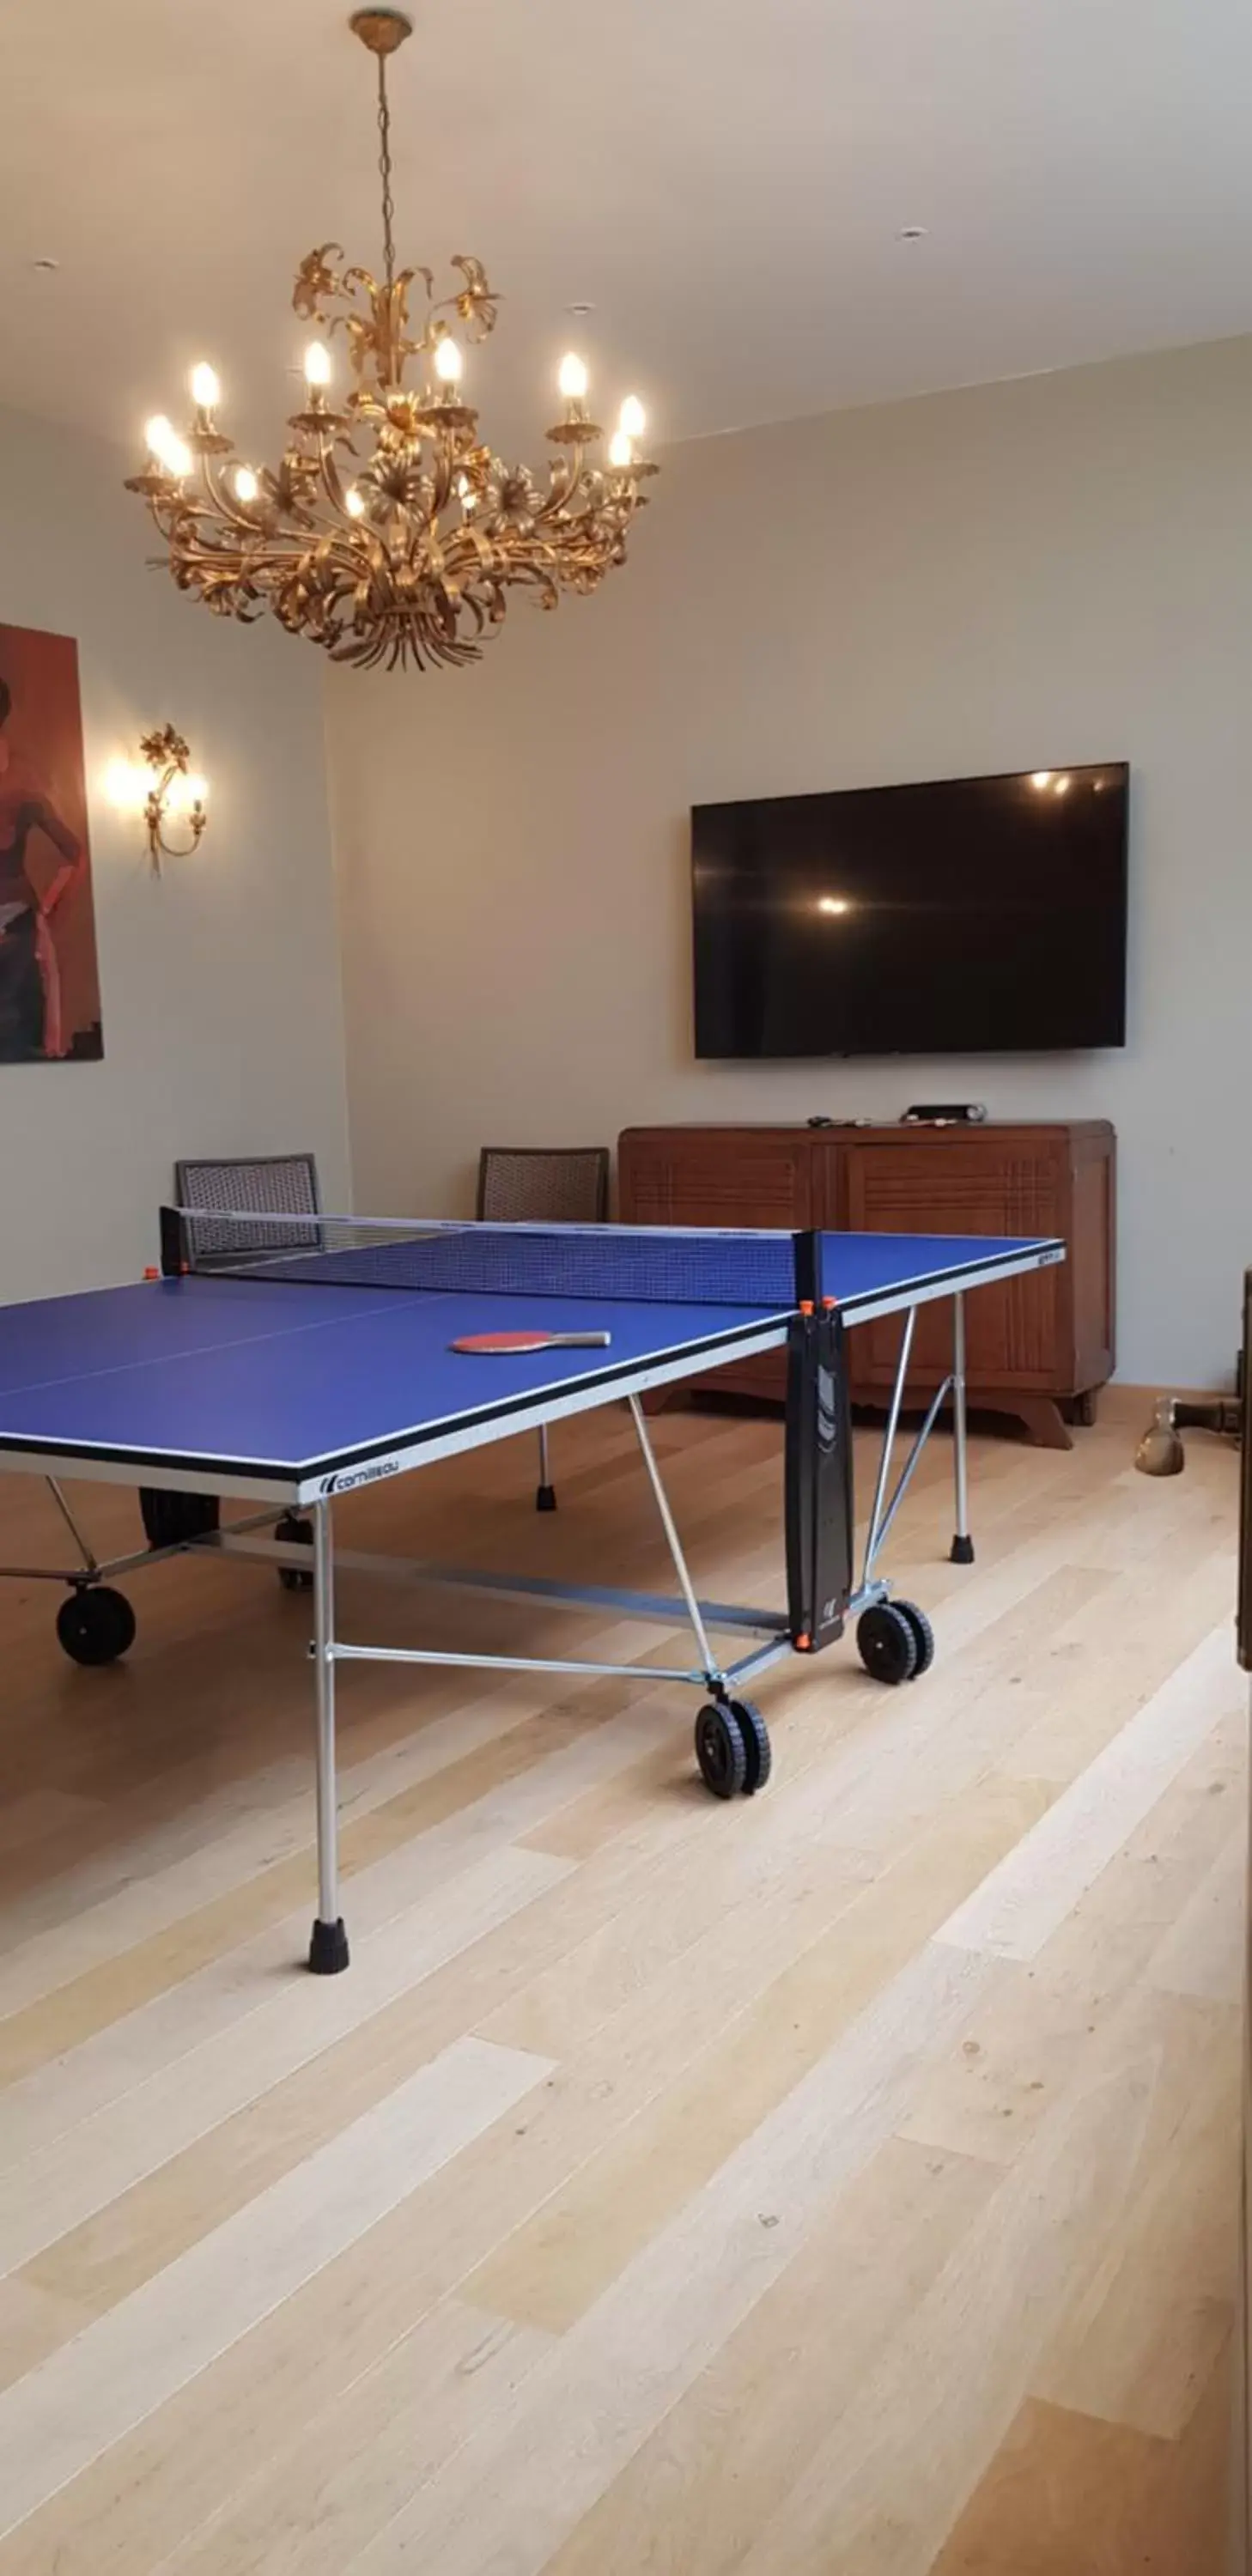 Table tennis, Billiards in Les Cabines